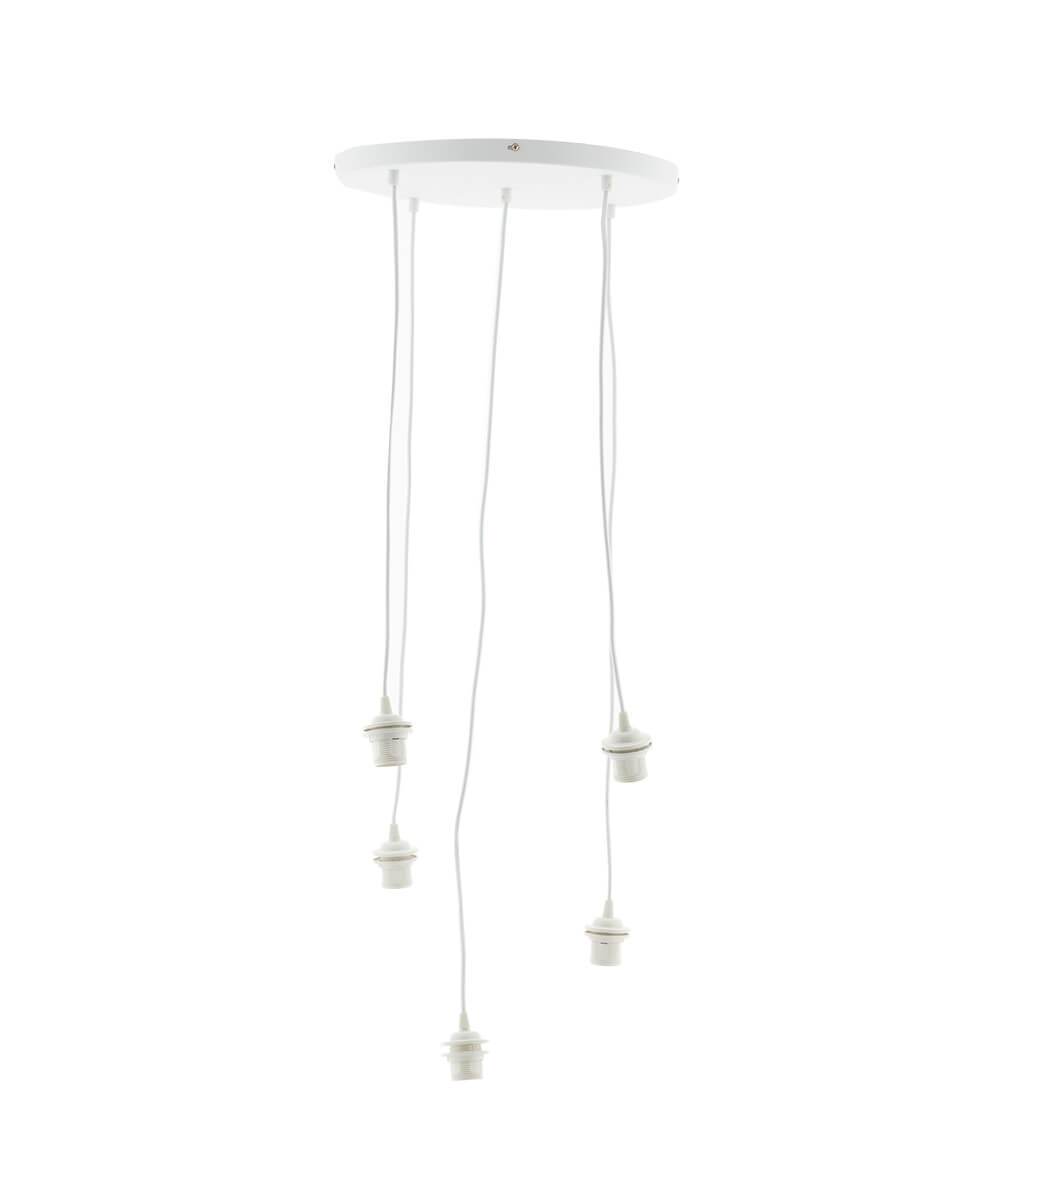 Fivefold - Support pour 5 luminaires Cotton Ball Lights 